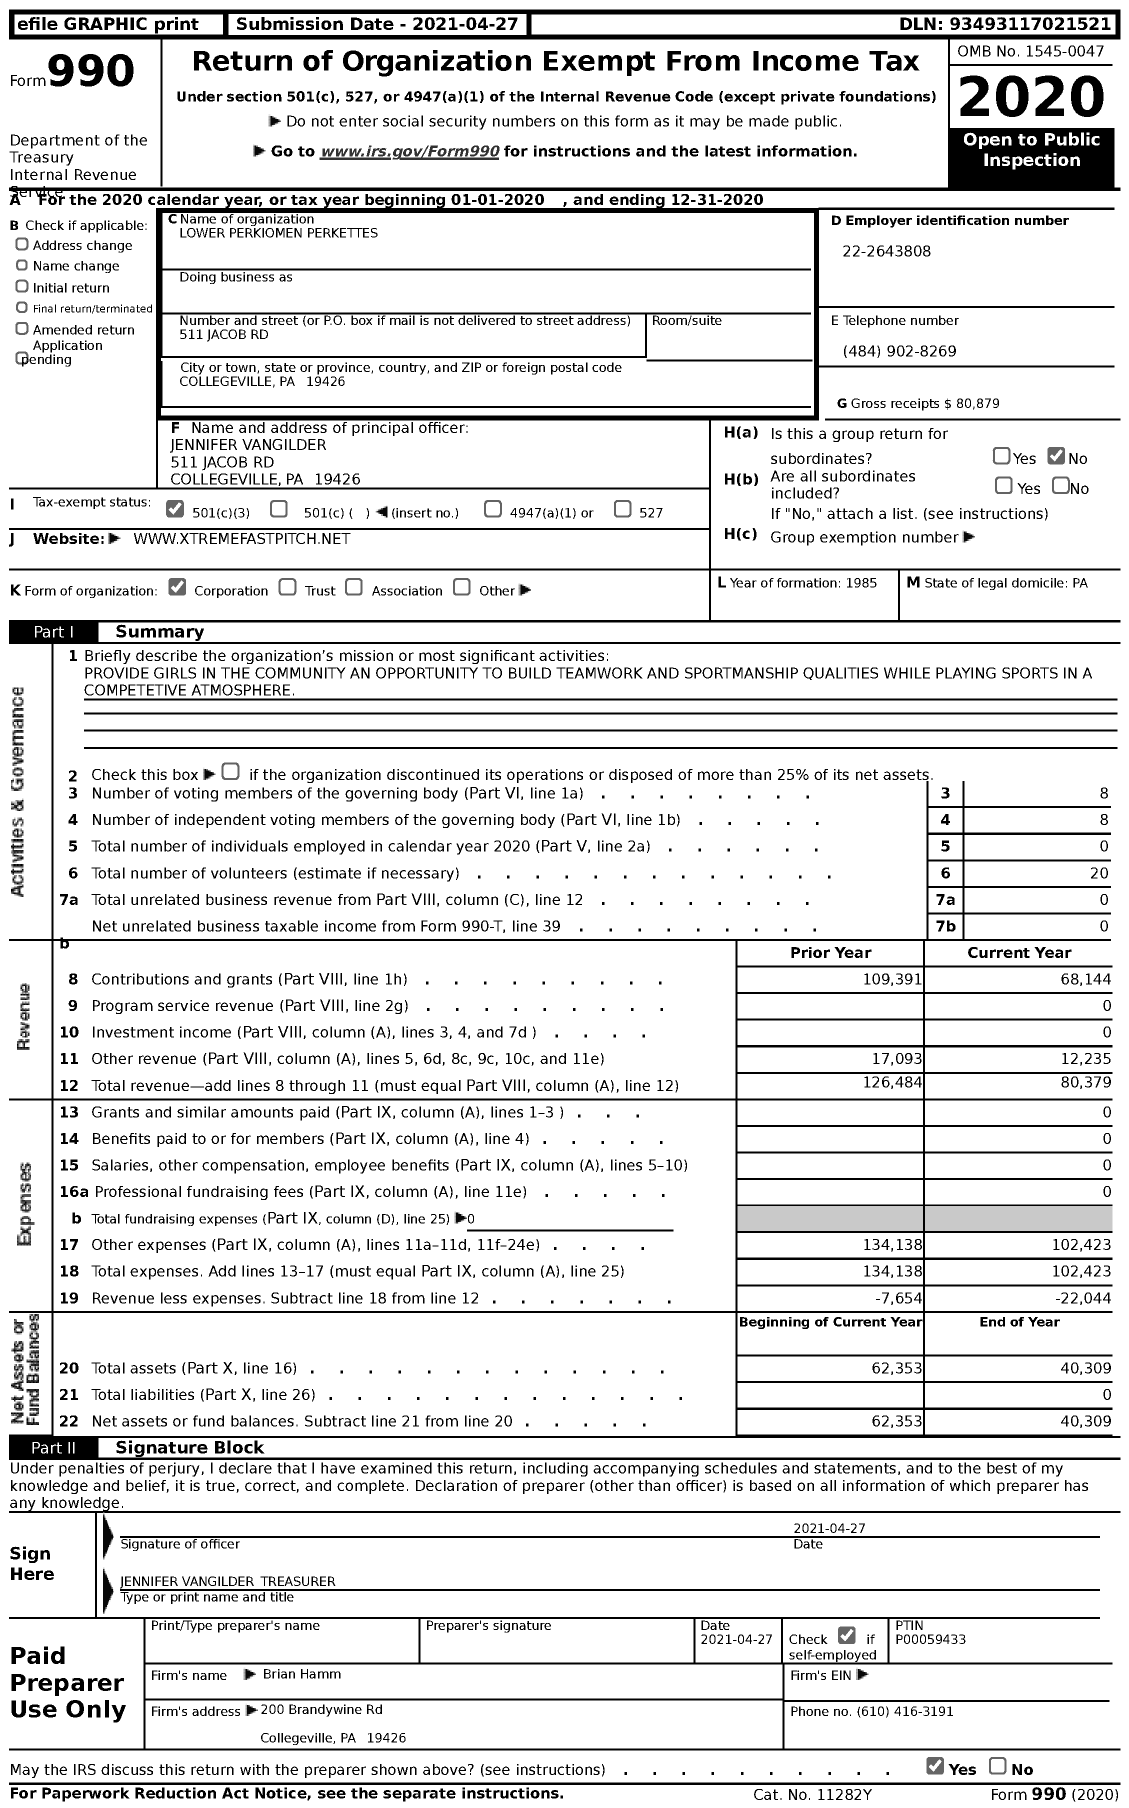 Image of first page of 2020 Form 990 for Lower Perkiomen Perkettes